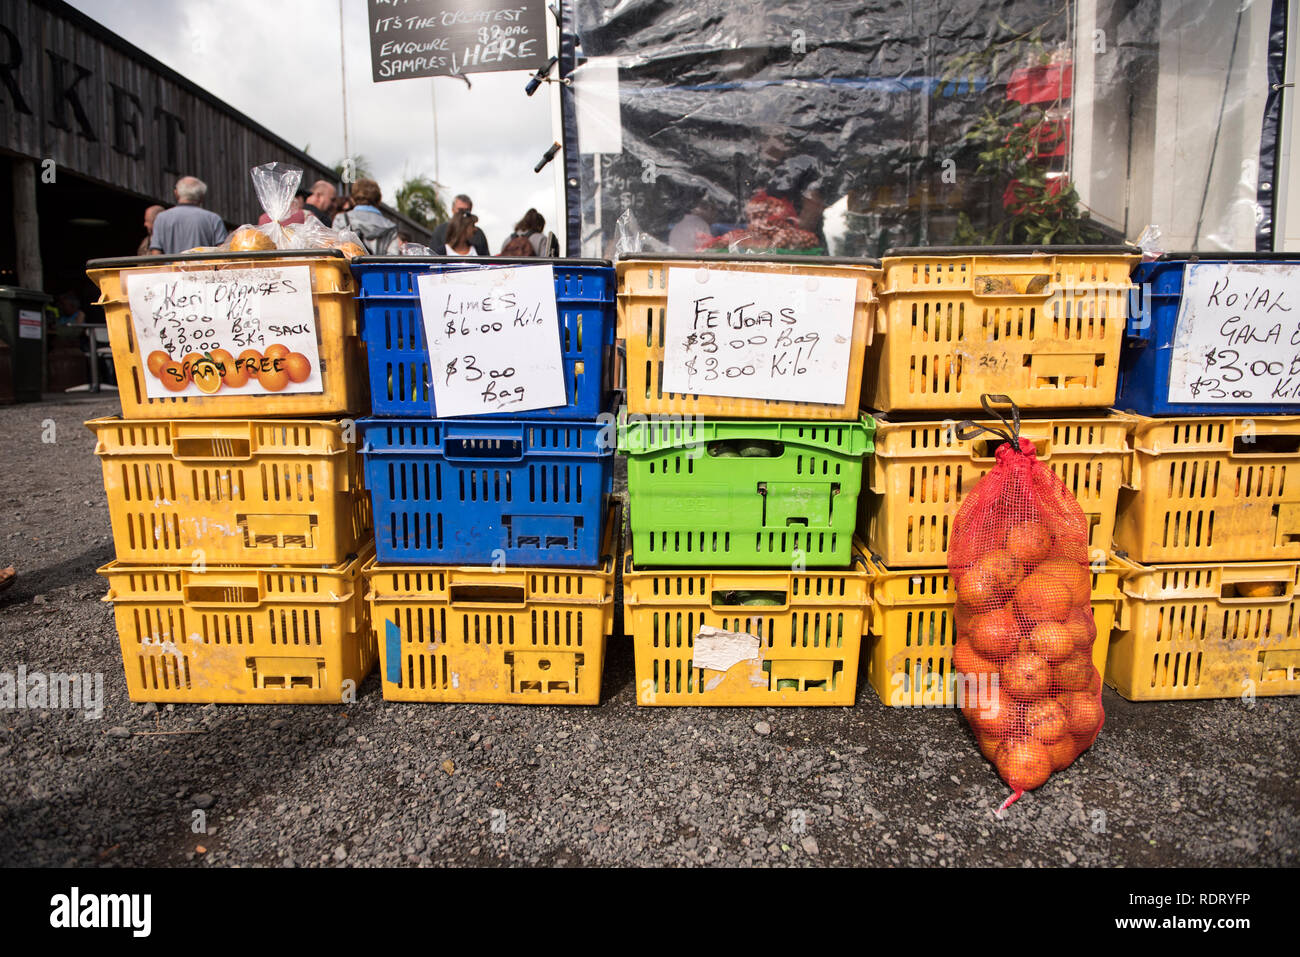 Colorful plastic baskets filled with fresh produce on display at the Old Packhouse Market in Kerikeri, New Zealand. Stock Photo